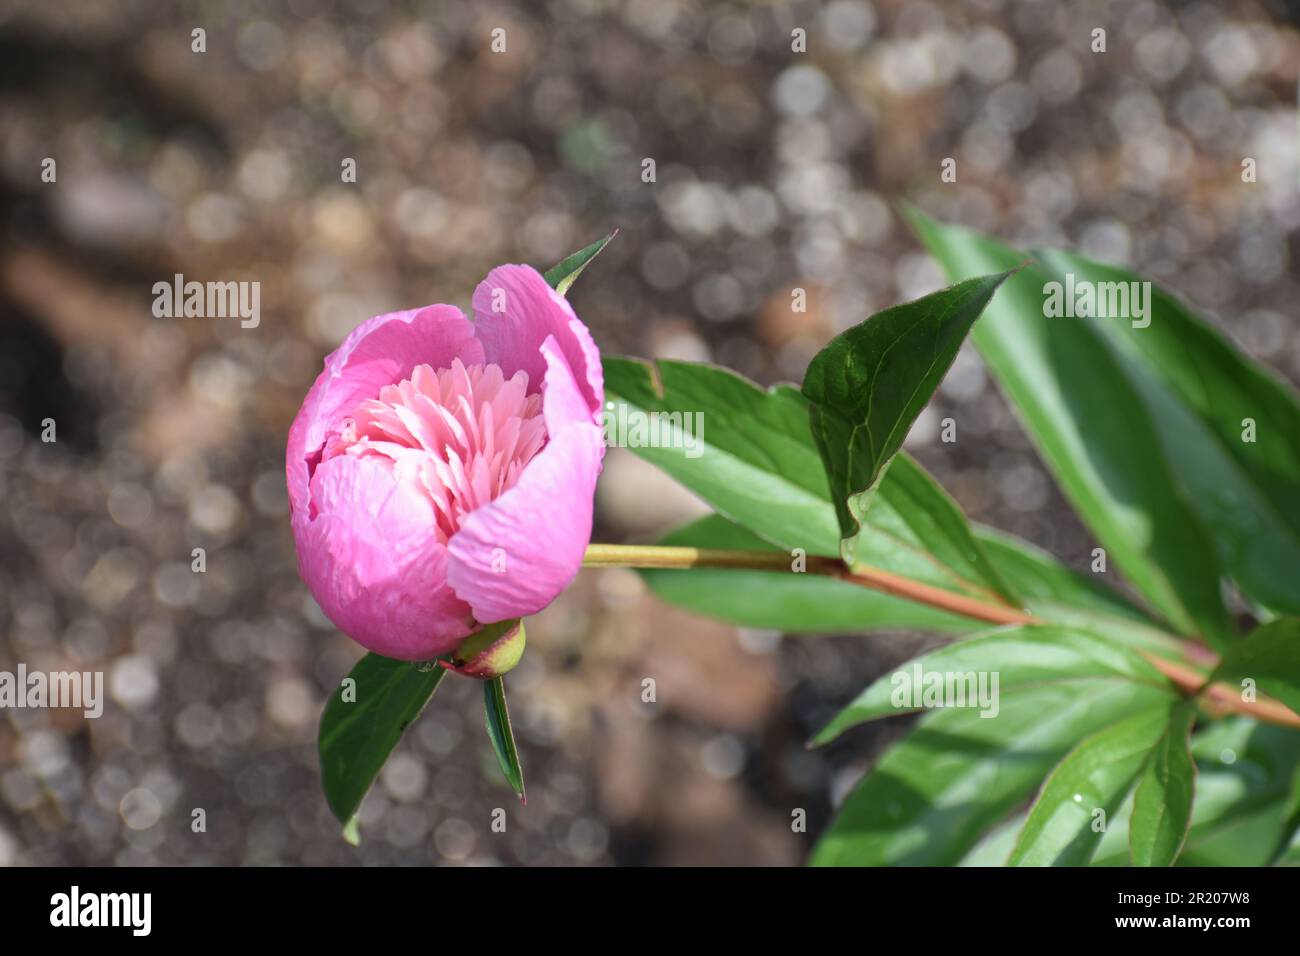 A pink peony, Paeonia officinalis, with blooms partially opened. Stock Photo